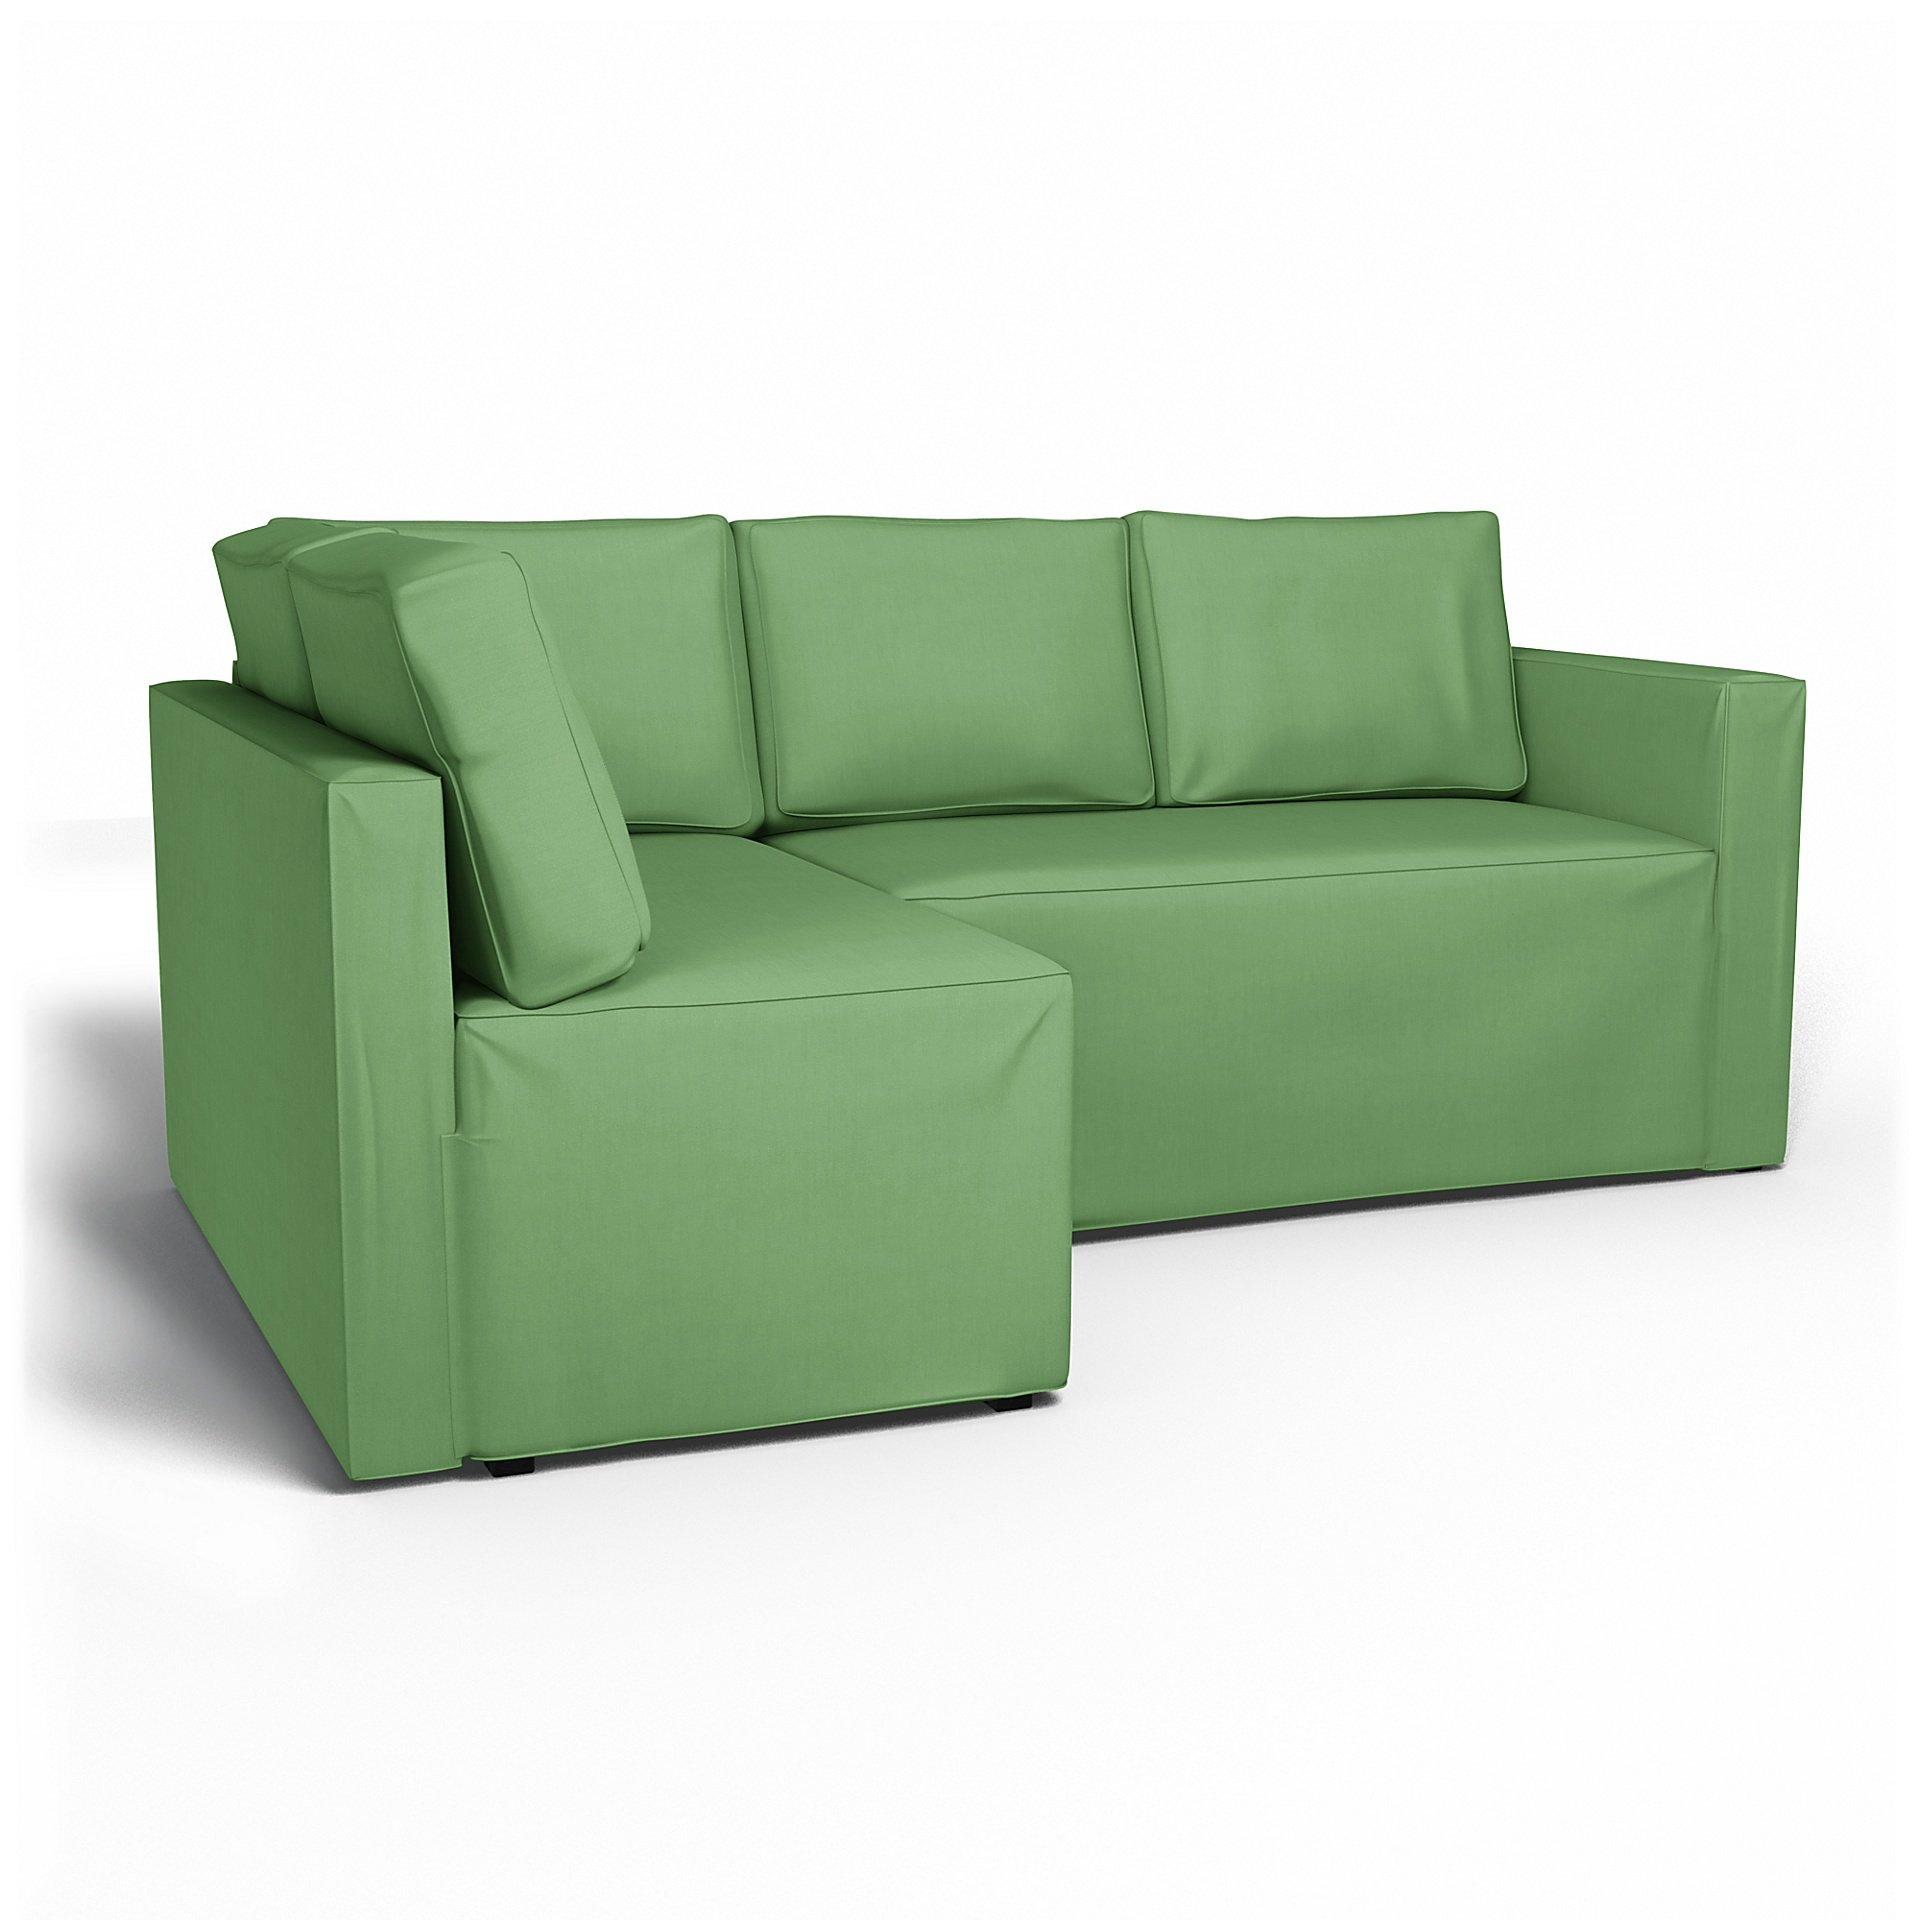 IKEA - Fagelbo Sofa Bed with Left Chaise Cover, Apple Green, Linen - Bemz